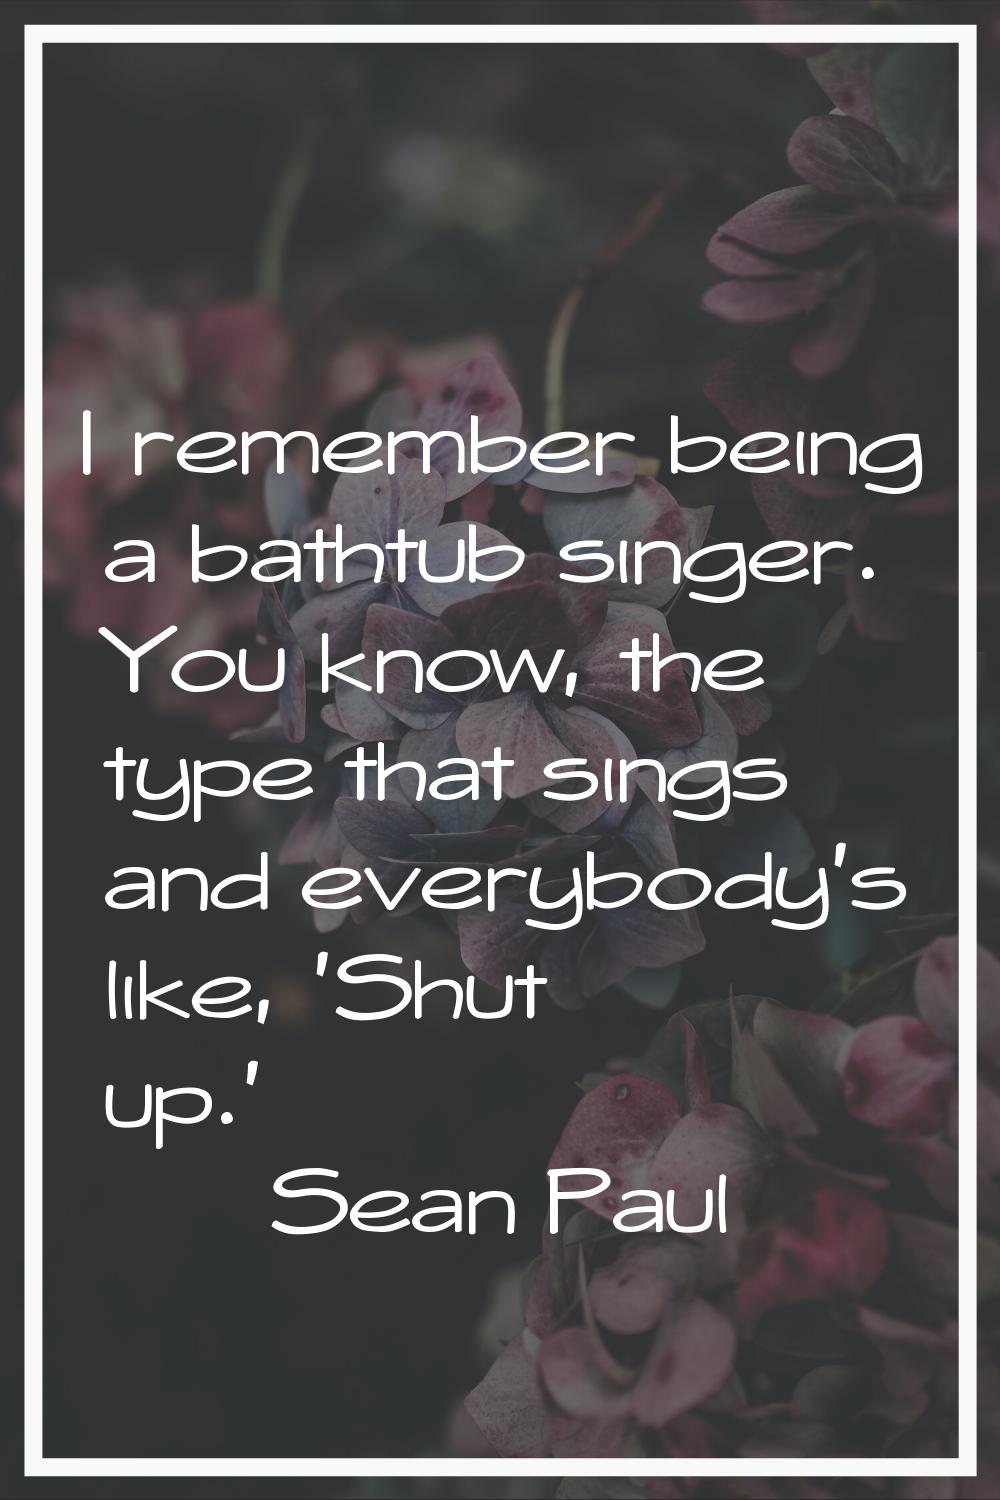 I remember being a bathtub singer. You know, the type that sings and everybody's like, 'Shut up.'